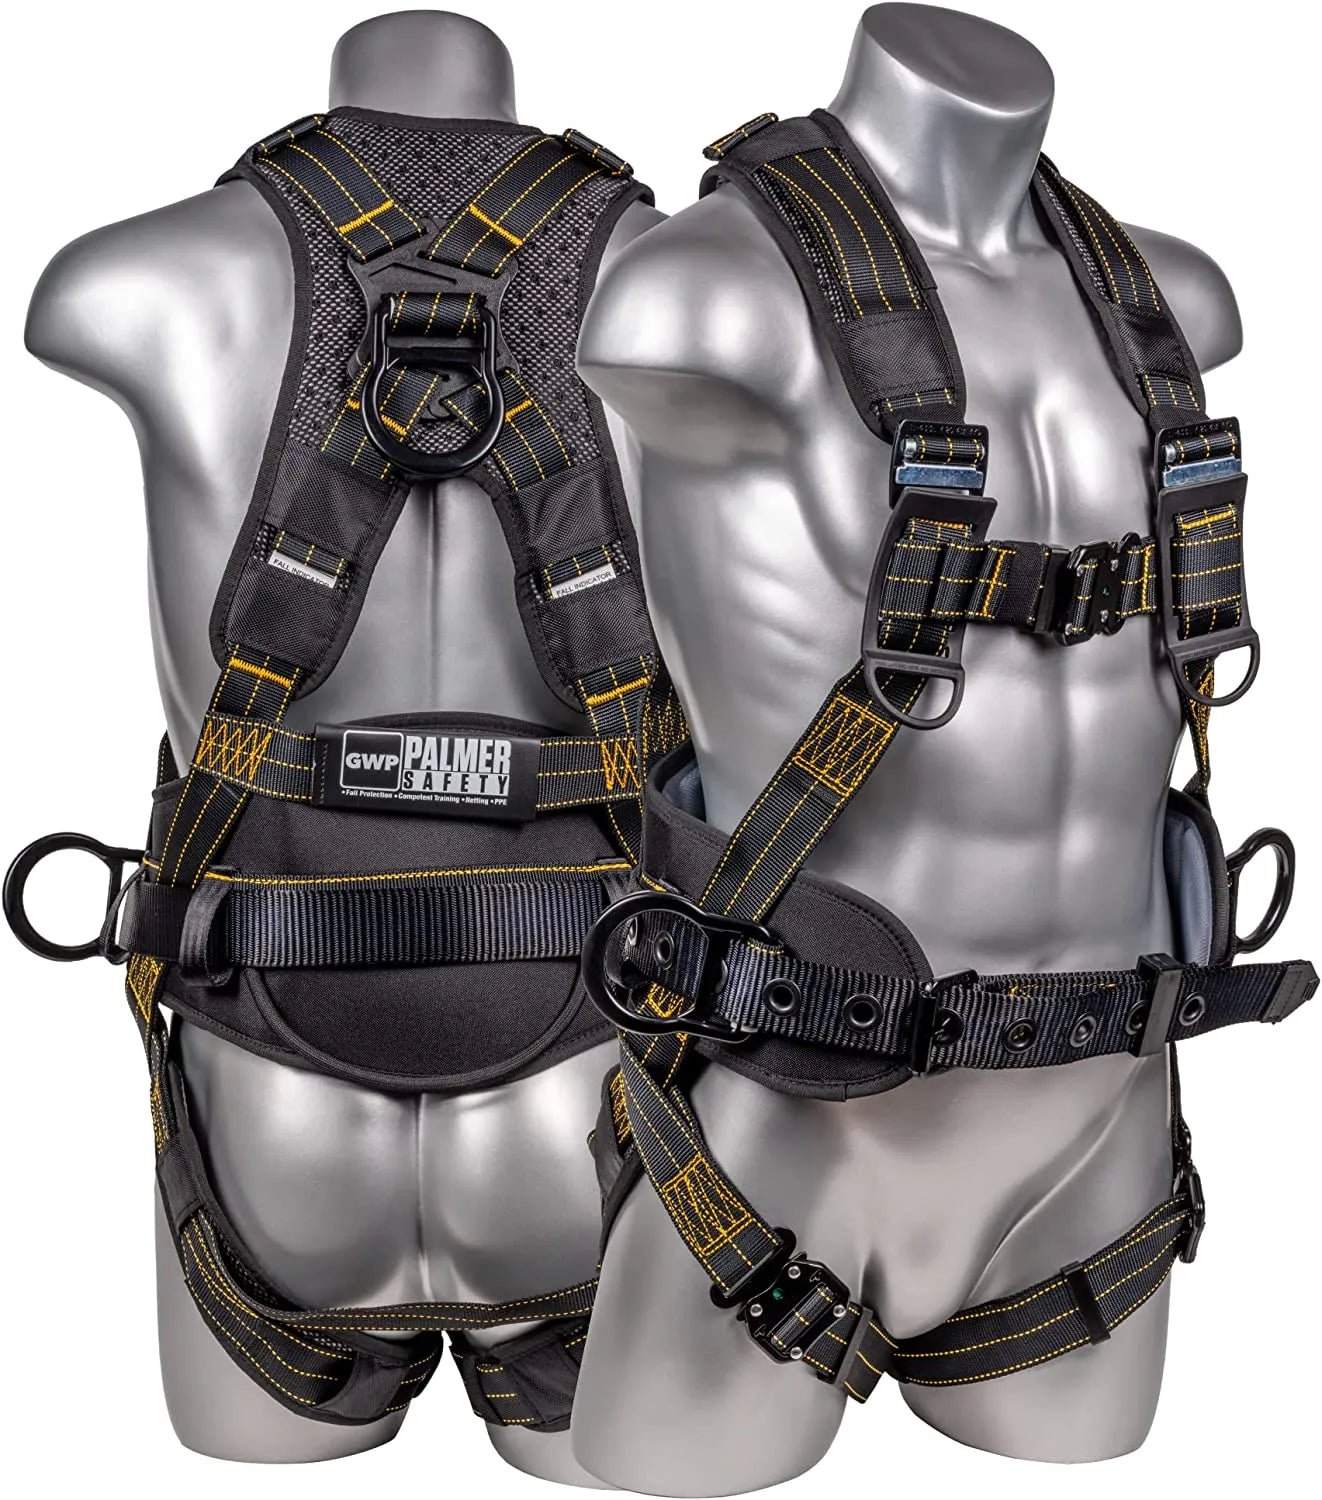 Construction Safety Harness 5 Point, Padded Back & Grommet Legs - Defender Safety